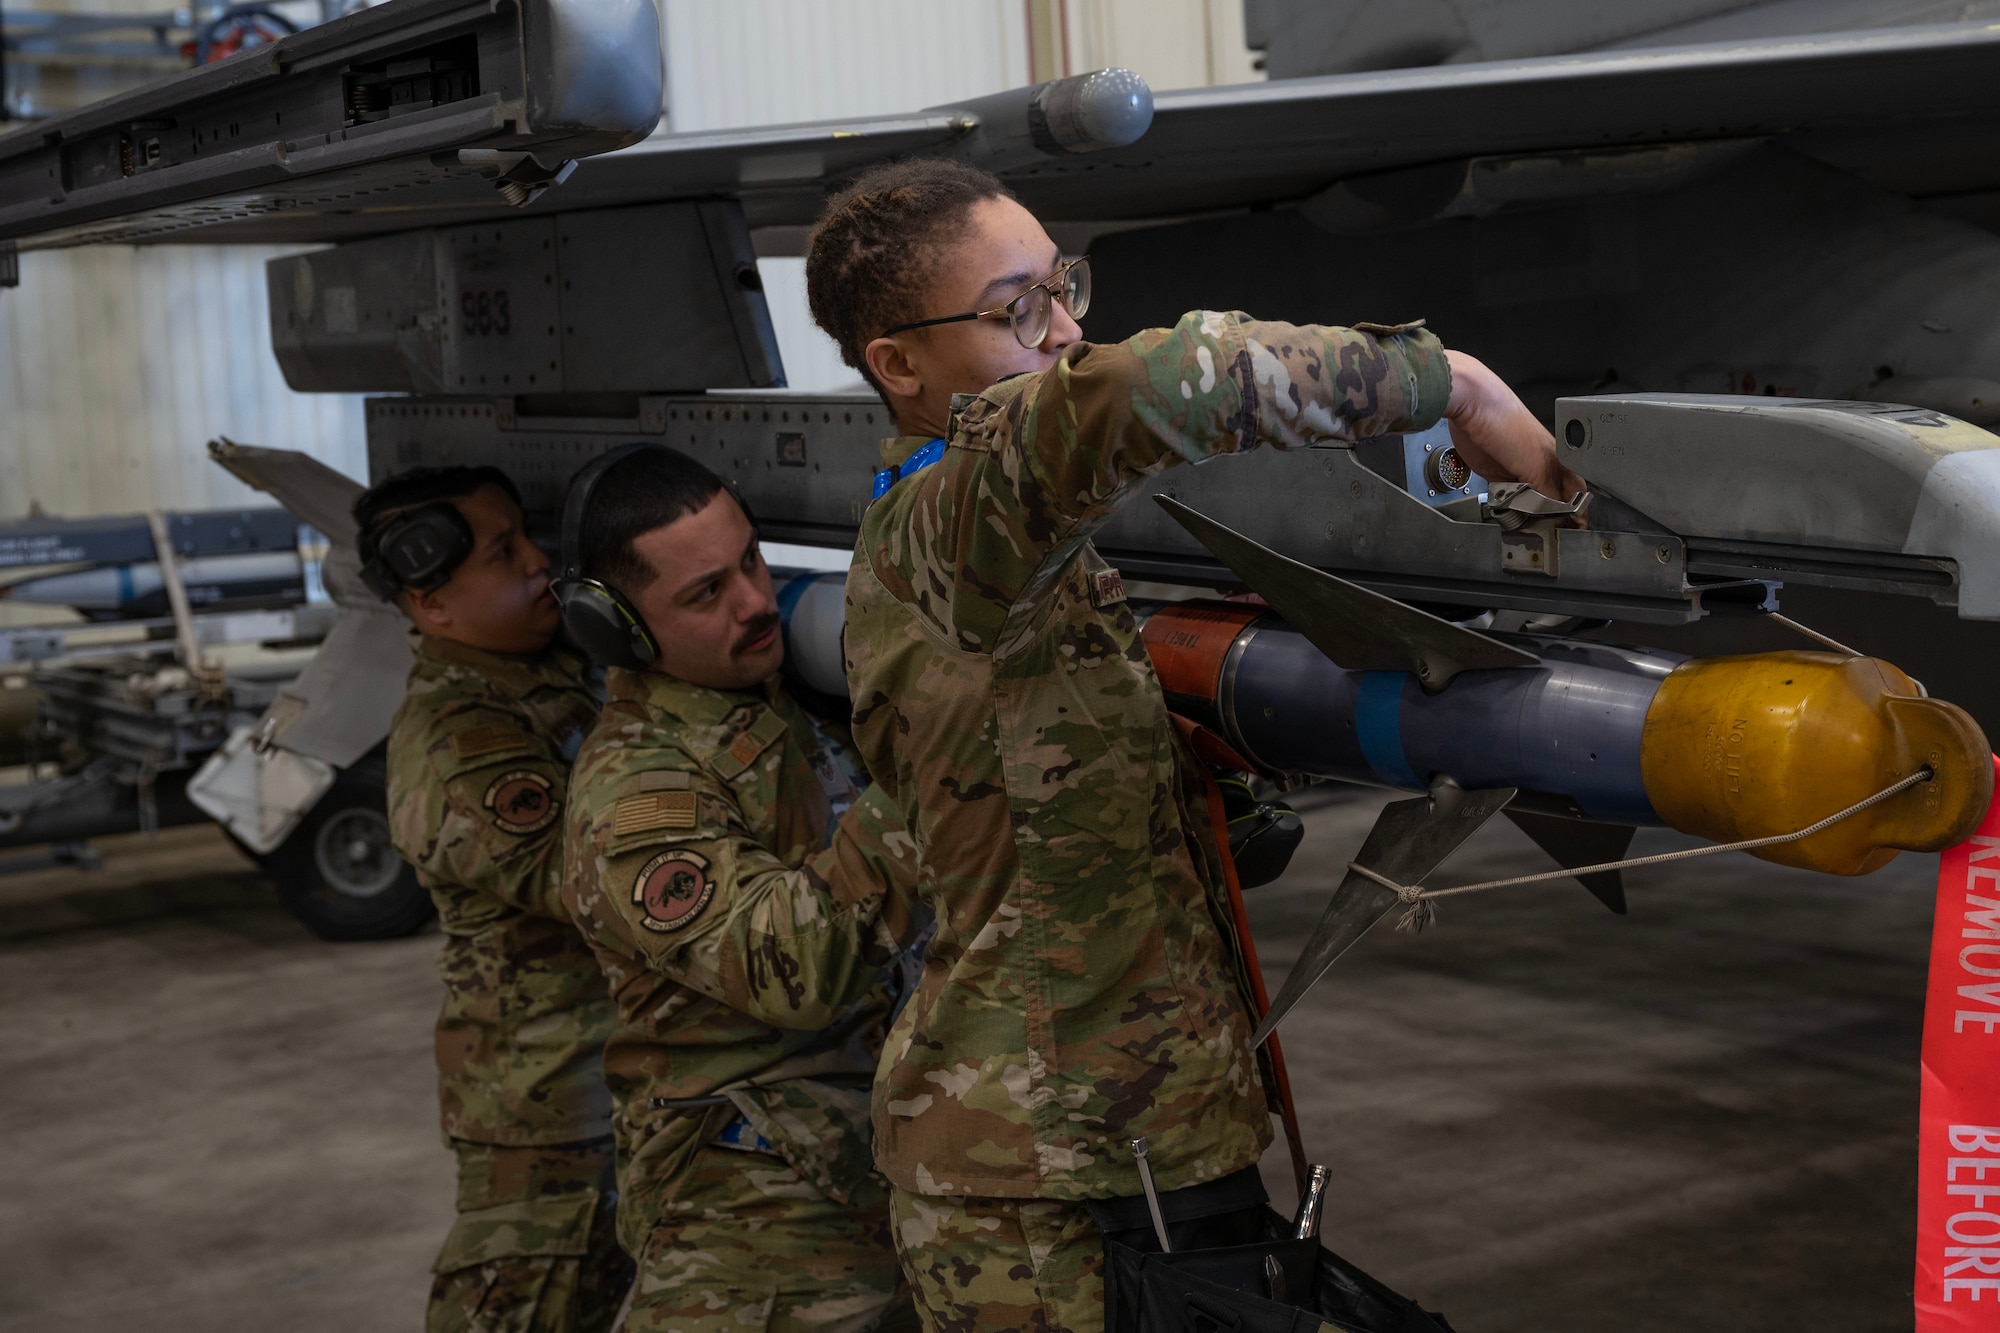 Load crew members from the 35th Fighter Generation Squadron hoist an Air Intercept Missile-9M to a F-16 Fighting Falcon.